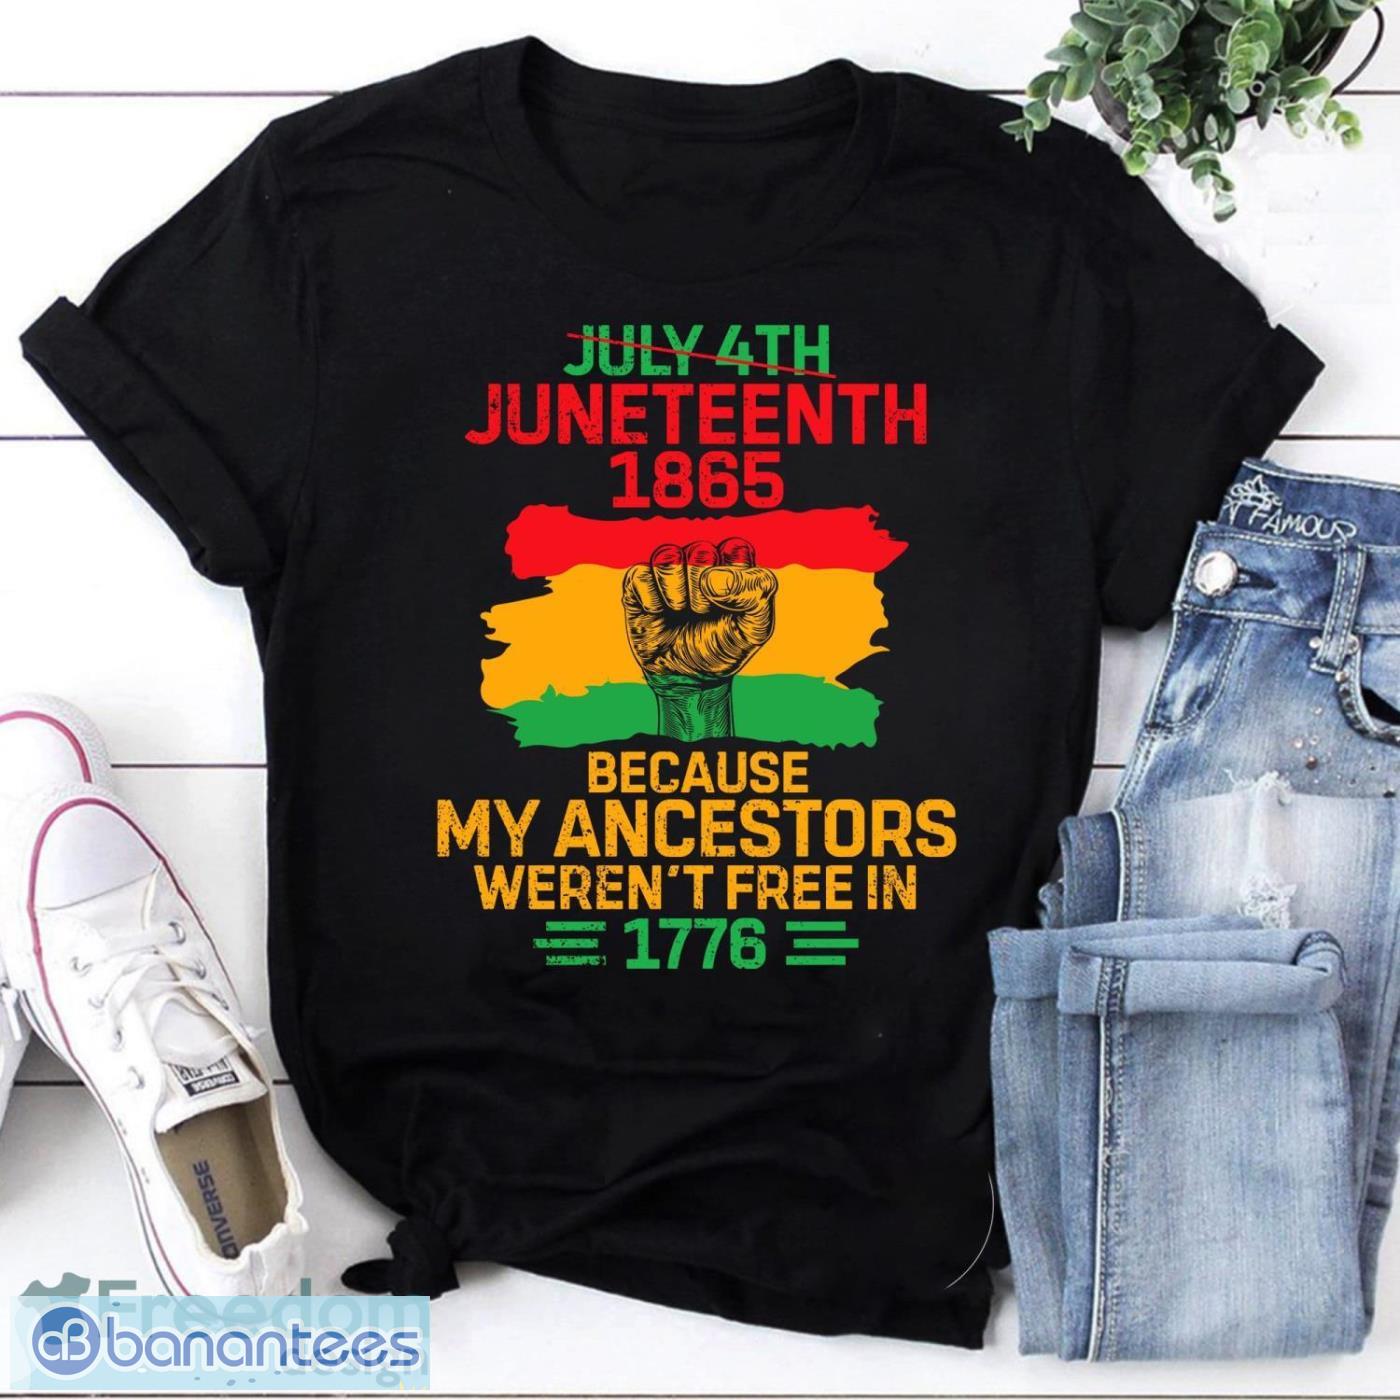 Juneteenth 1865 Because My Ancestors Weren’t Free In 1776 Vintage T-Shirt Product Photo 1